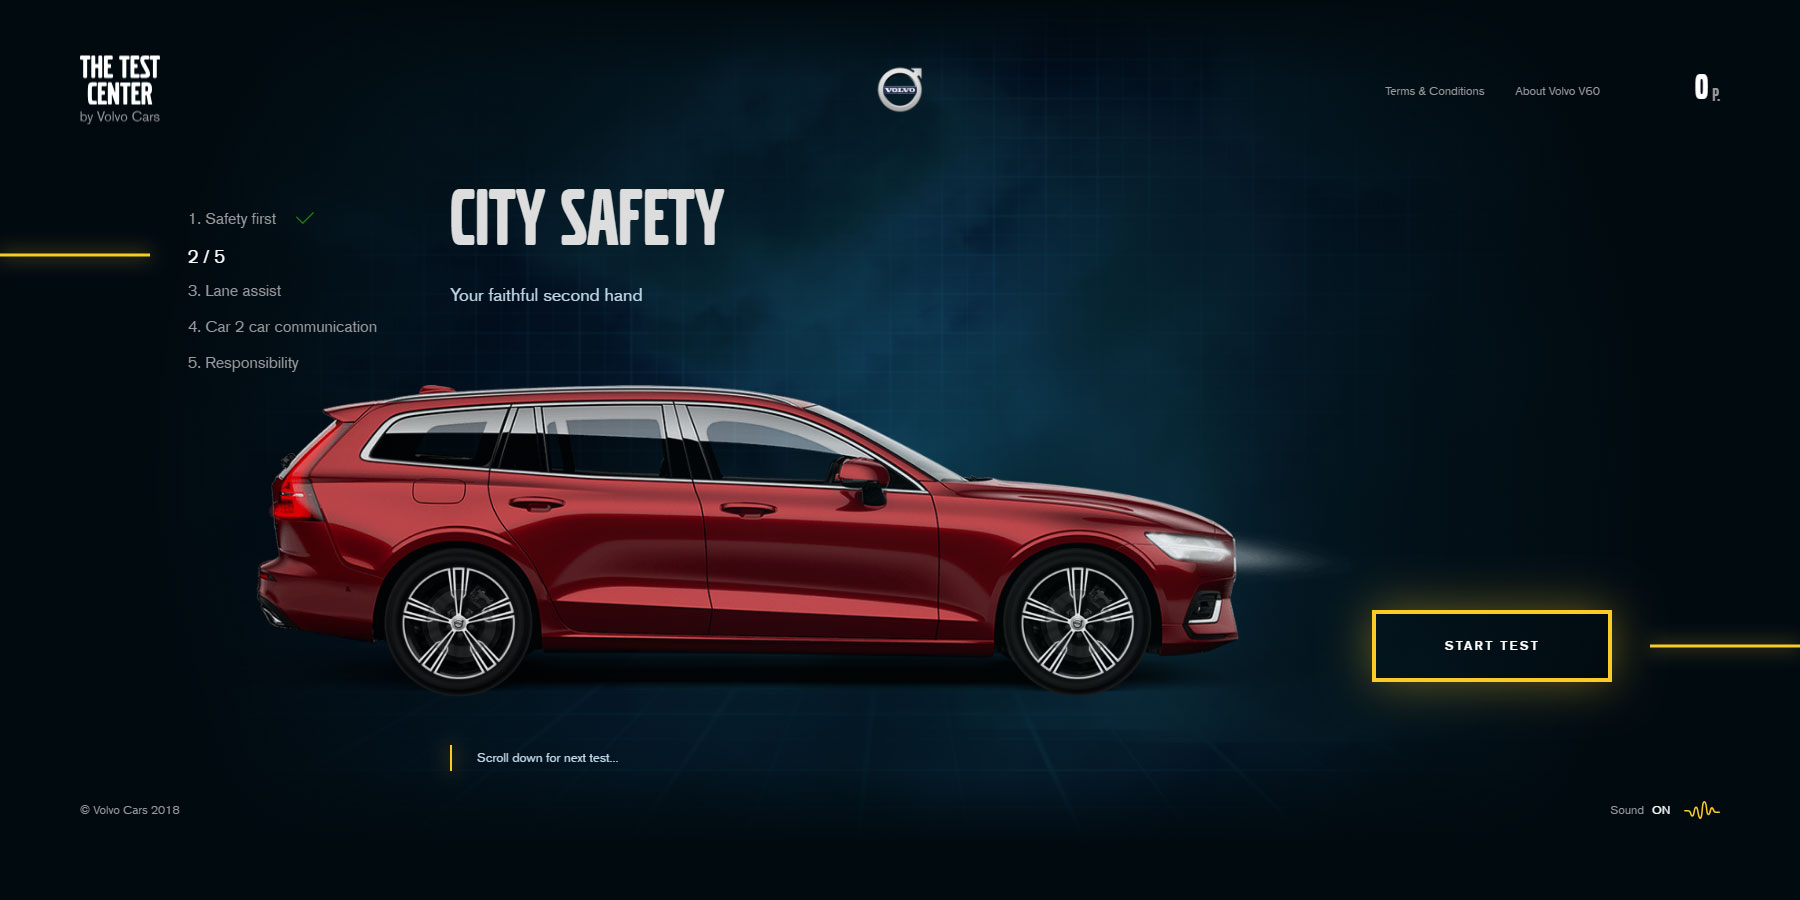 The Test Center by Volvo Cars - Website of the Month